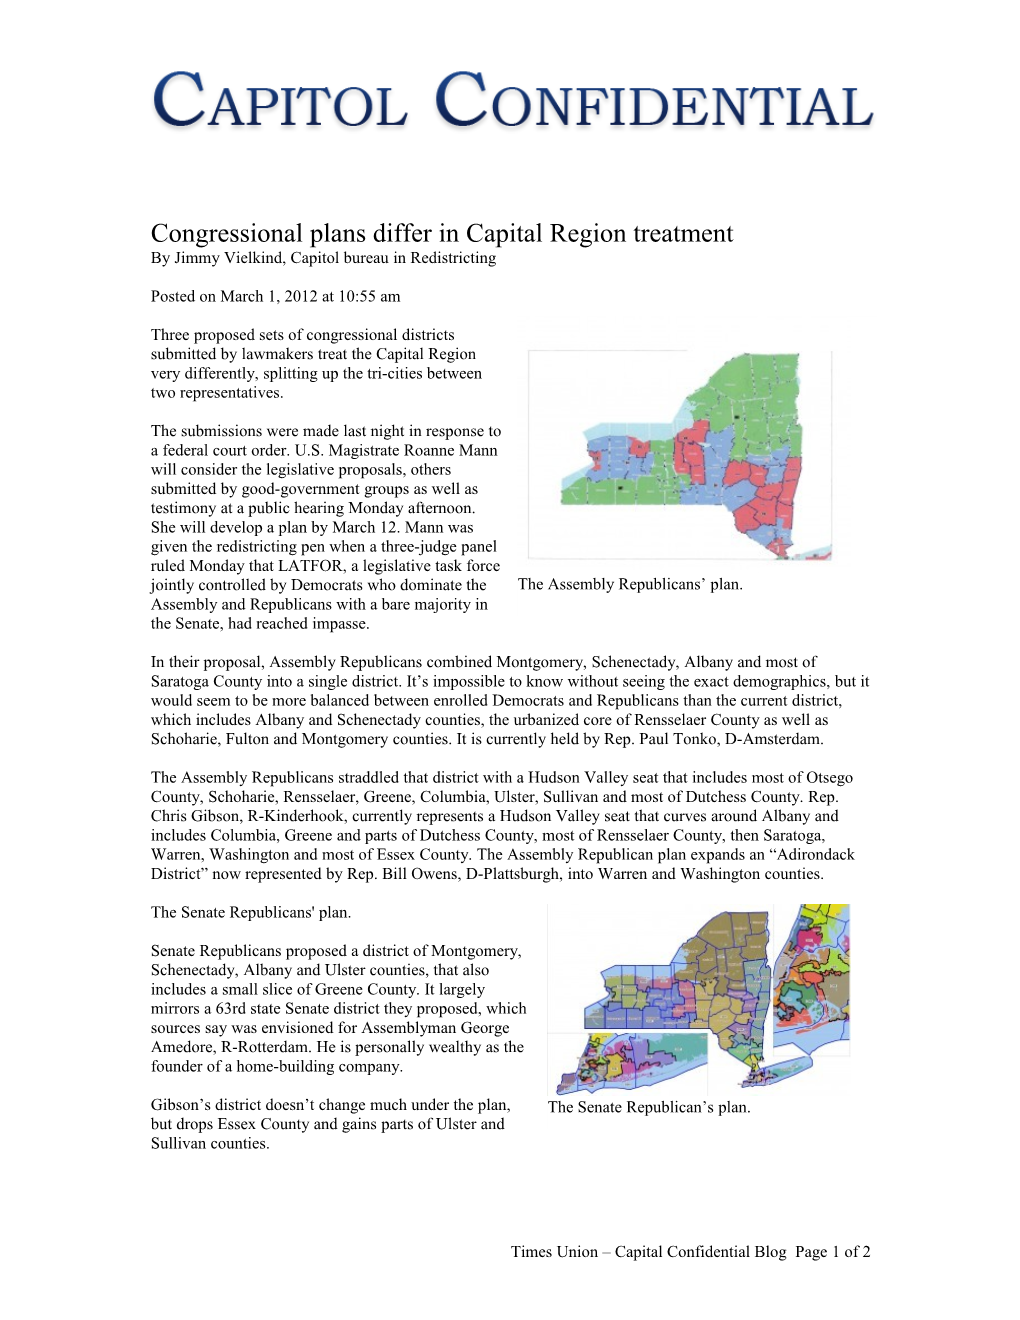 Congressional Plans Differ in Capital Region Treatment